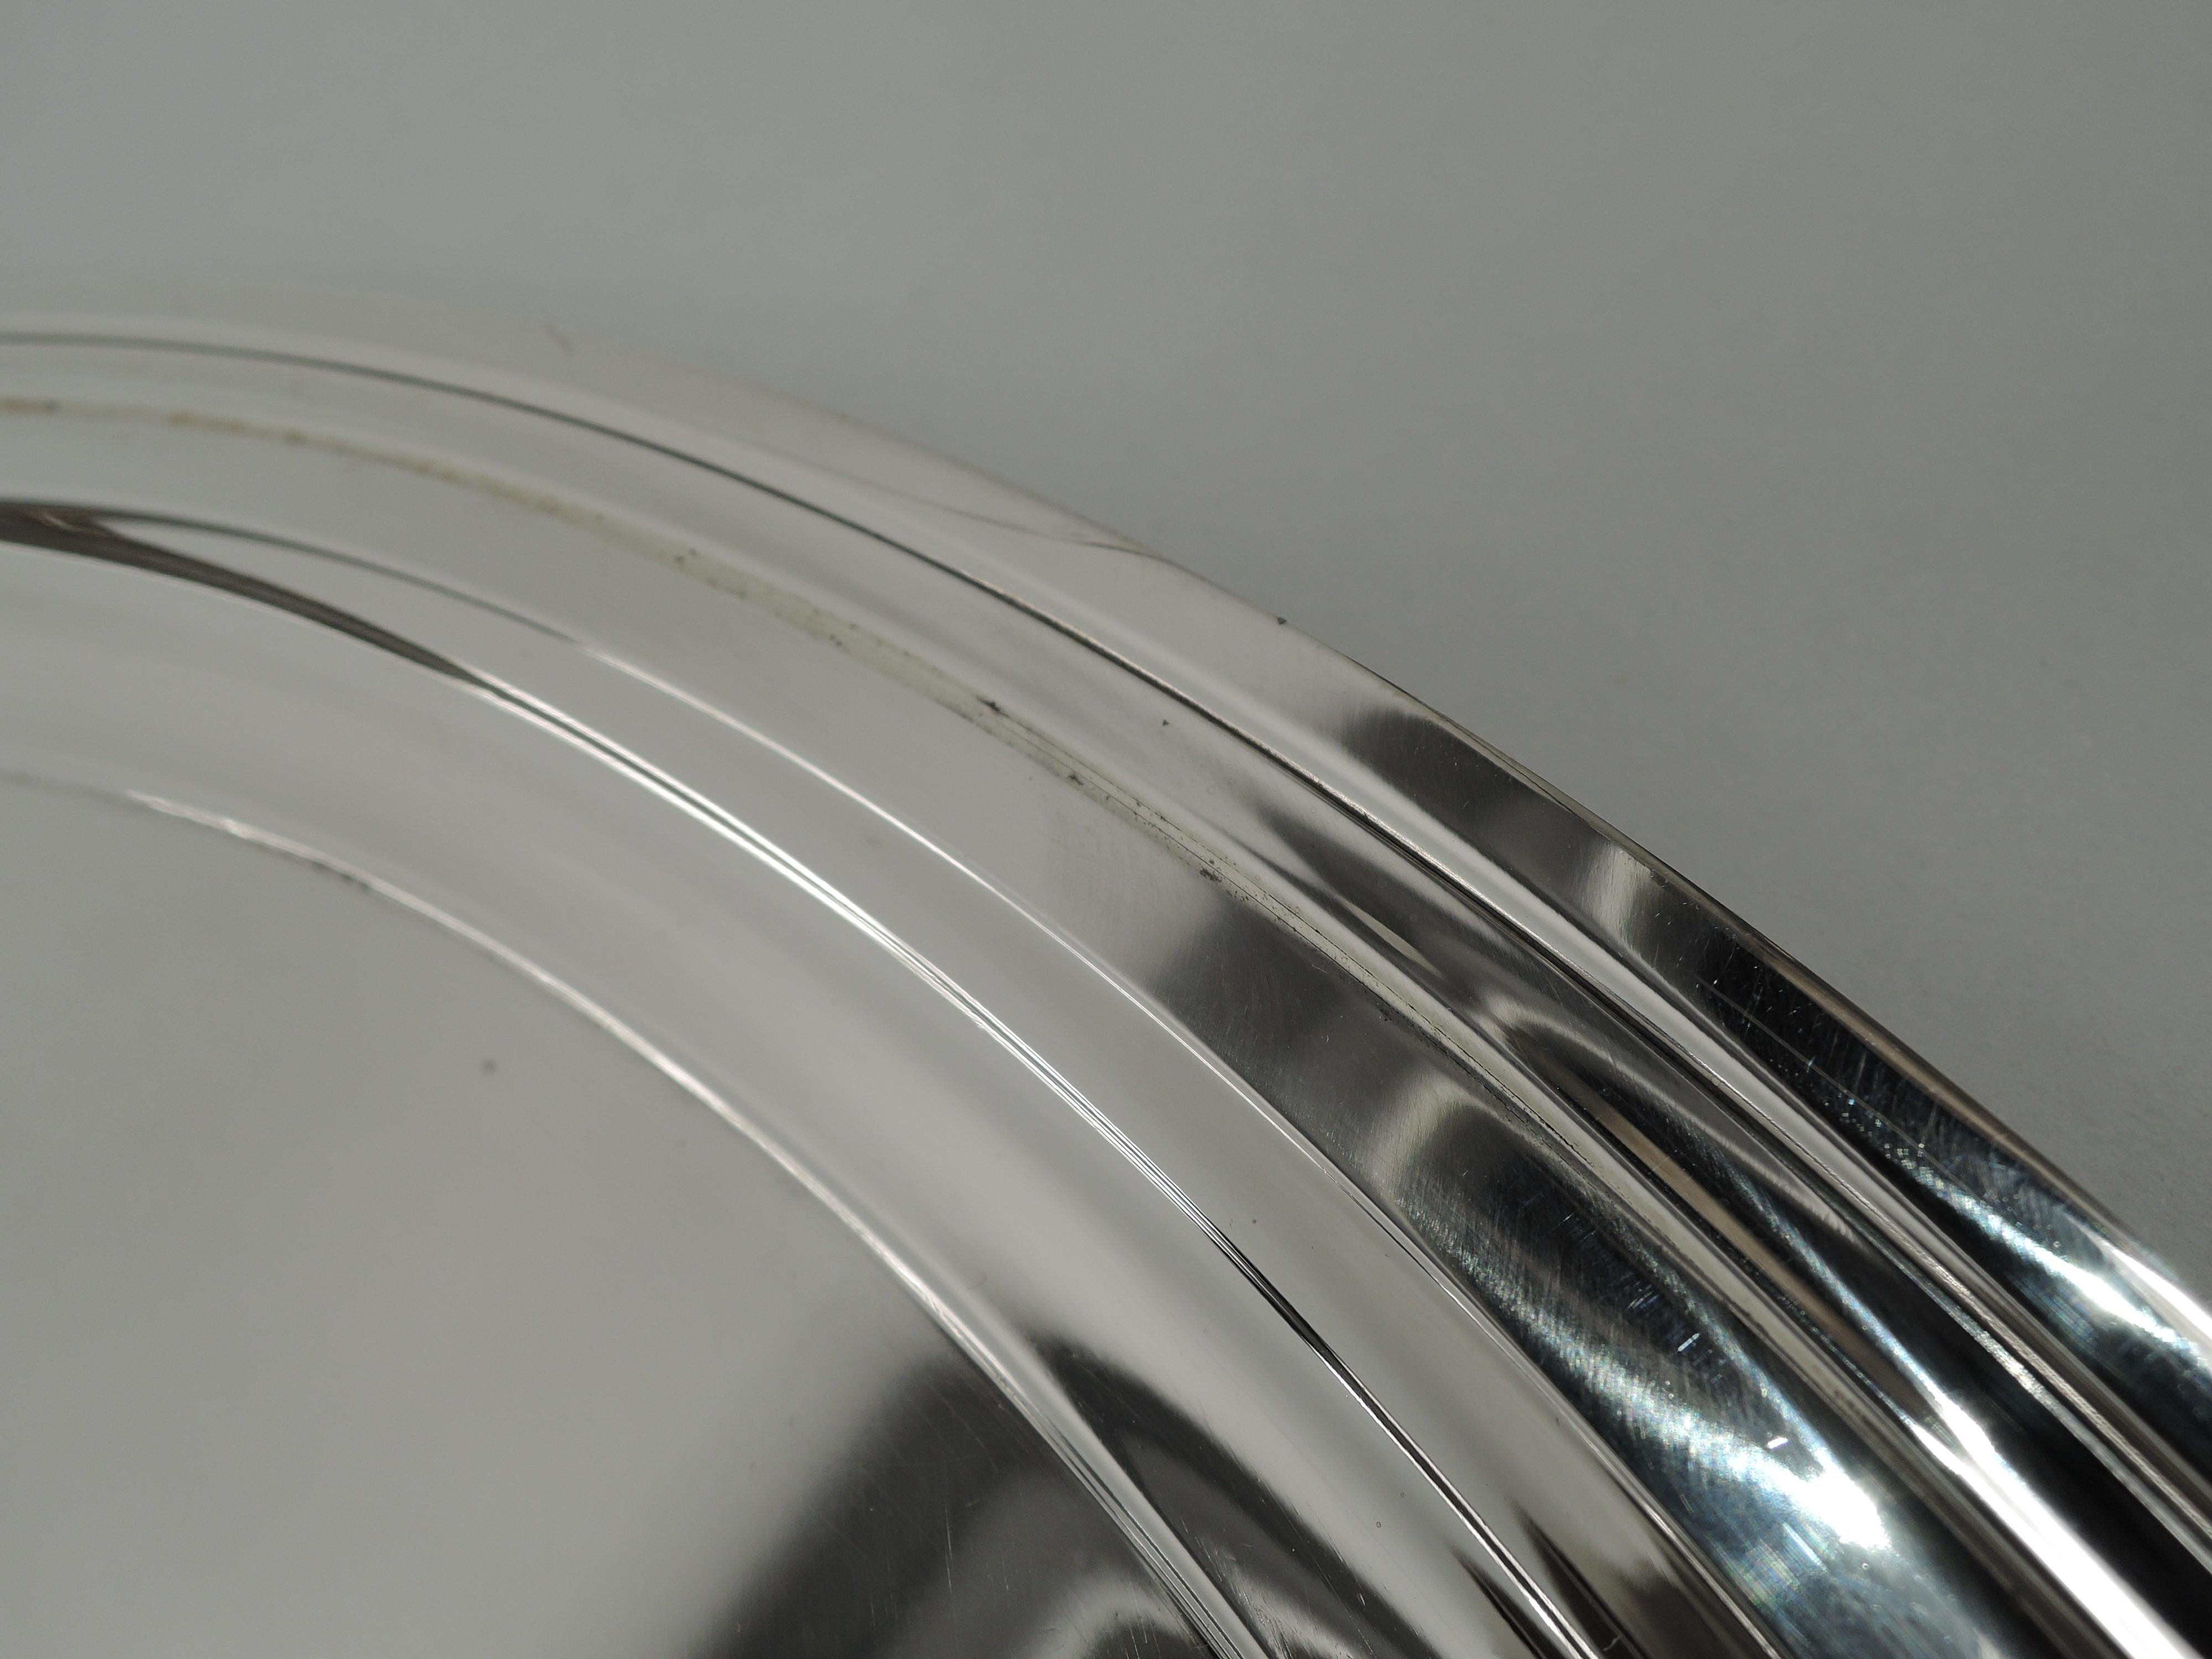 Large and Modern sterling silver serving tray. Made by Tiffany & Co. in New York. Round with stepped rim and deep well. Party size with nice heft and balance for circulating the hors d’oeuvres. Fully marked including maker’s stamp, pattern no.